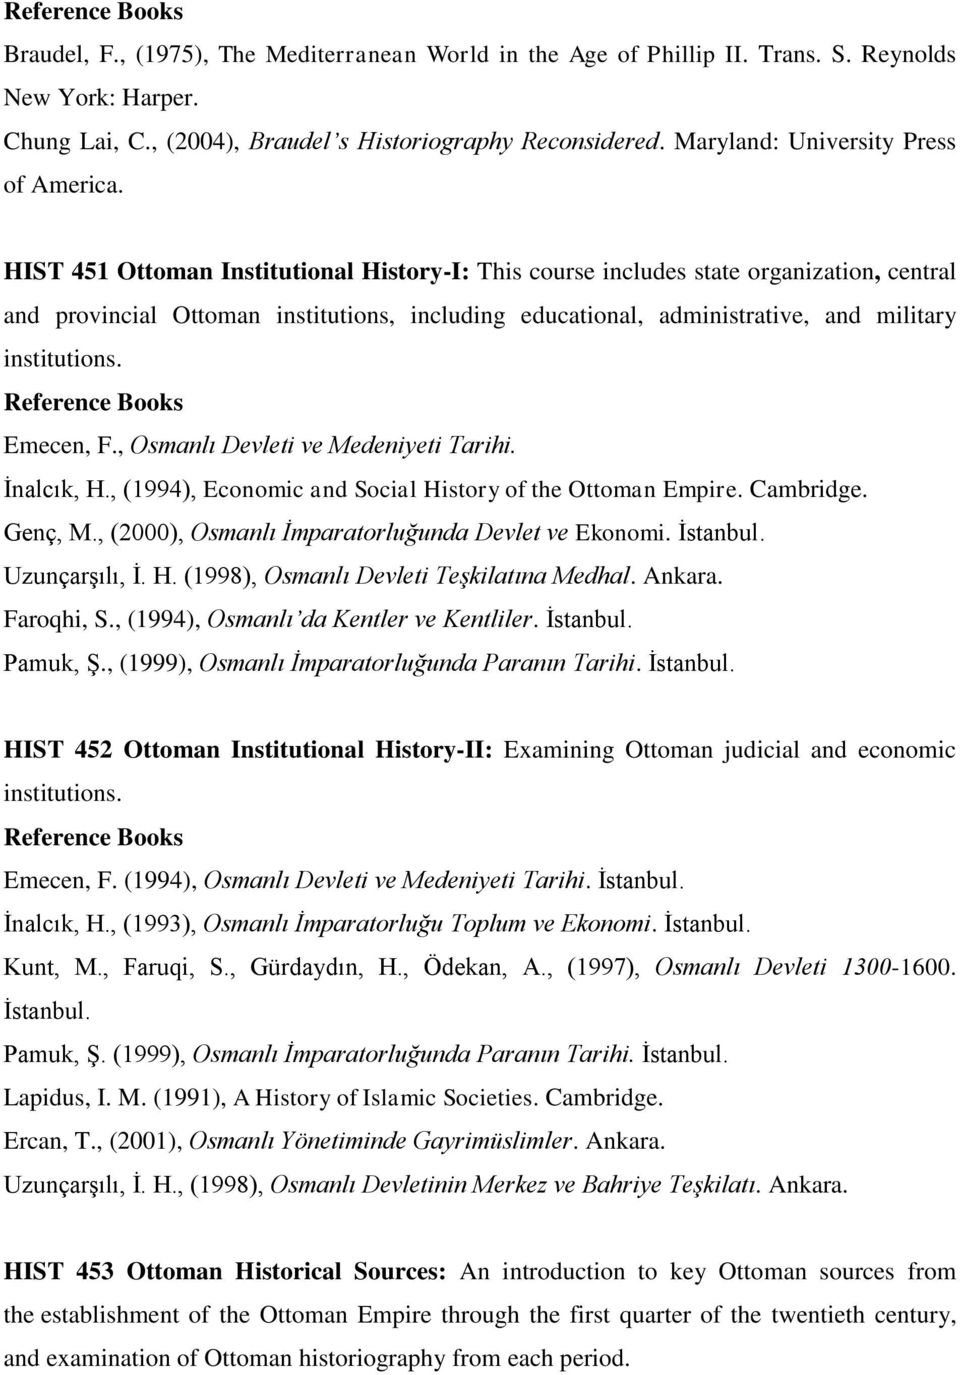 HIST 451 Ottoman Institutional History-I: This course includes state organization, central and provincial Ottoman institutions, including educational, administrative, and military institutions.